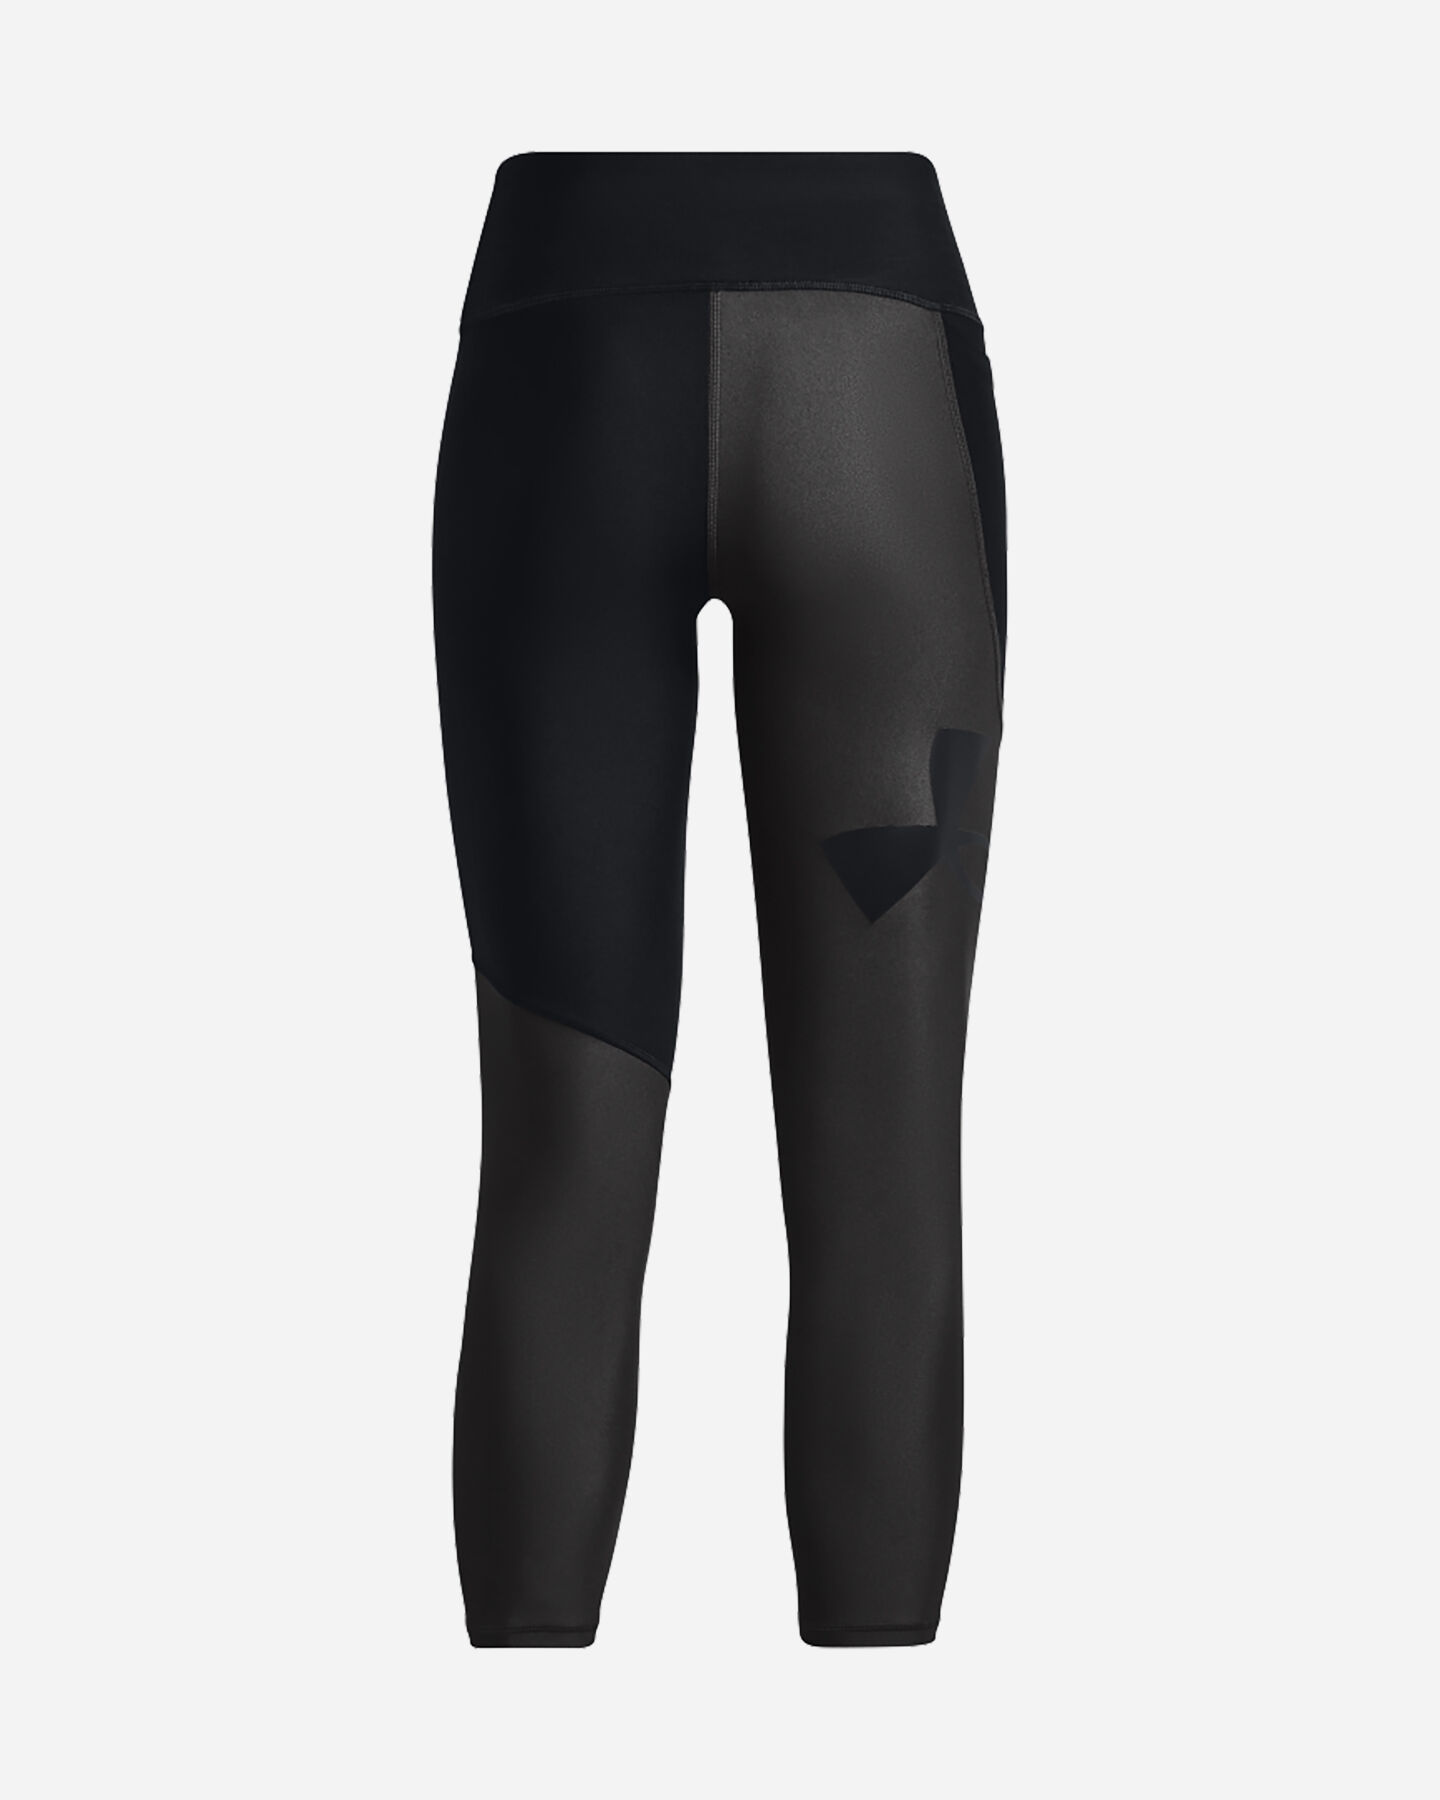  Leggings UNDER ARMOUR ARMOUR COLORBLOCK ANKLE W S5459381|0001|XS scatto 1